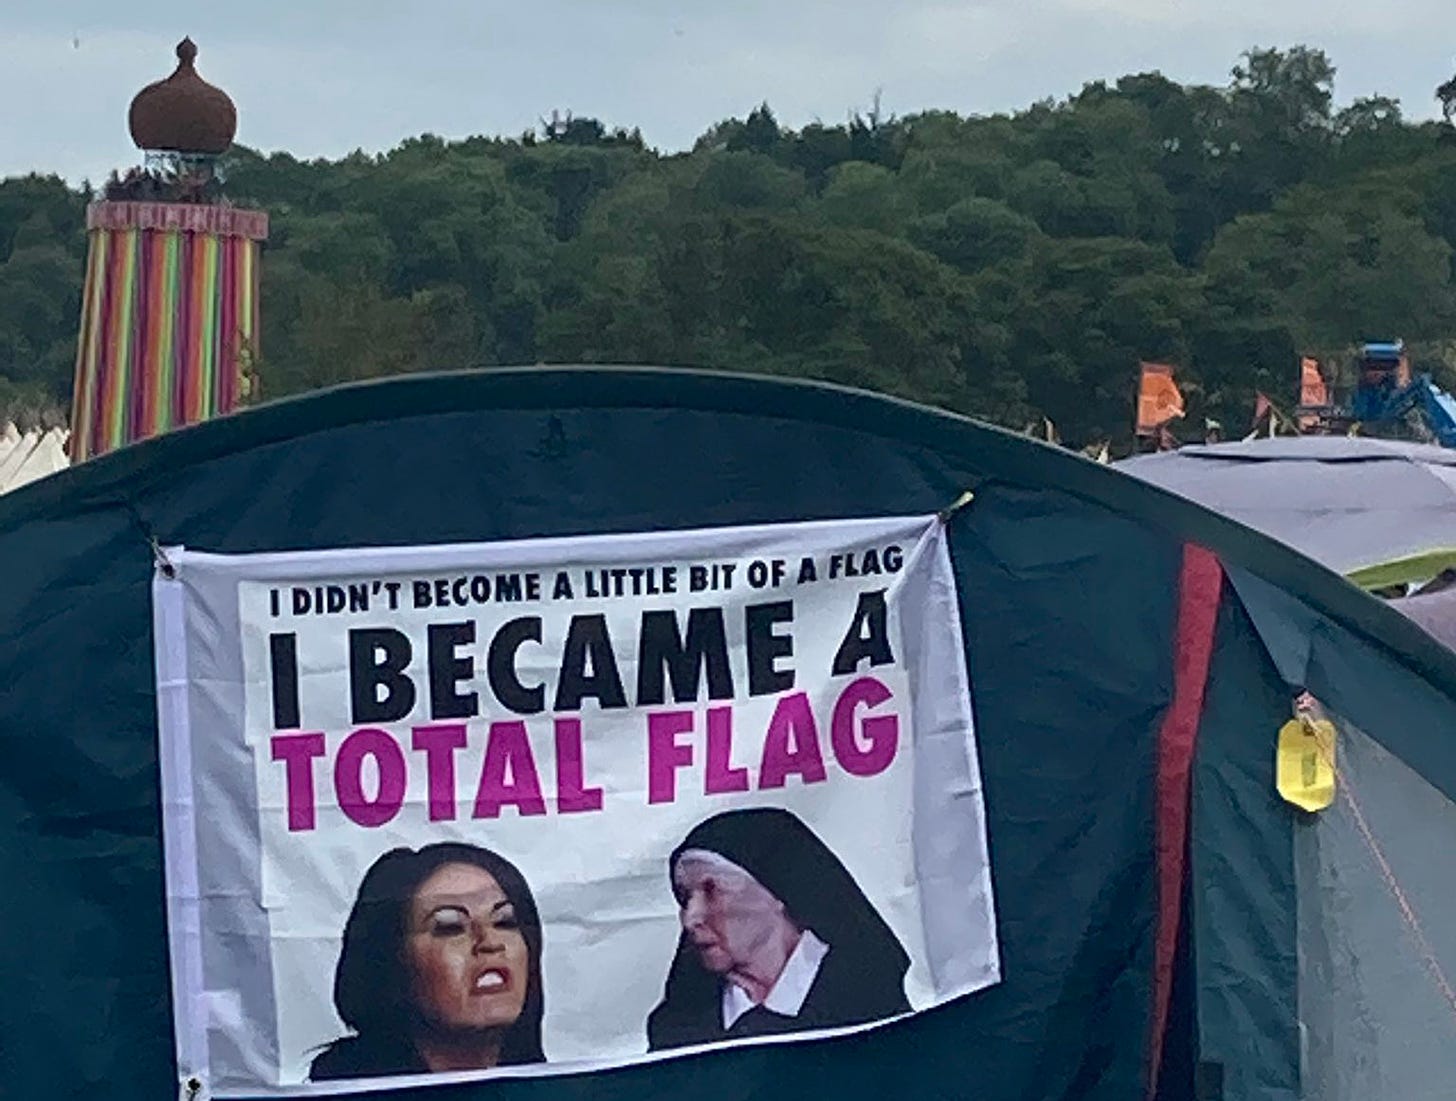 A tent at Glastonbury which features an EastEnders scene where Kat Slater tells a nun (June Whitfield) 'I didn't just become a little bit of a flag, I became a total flag'